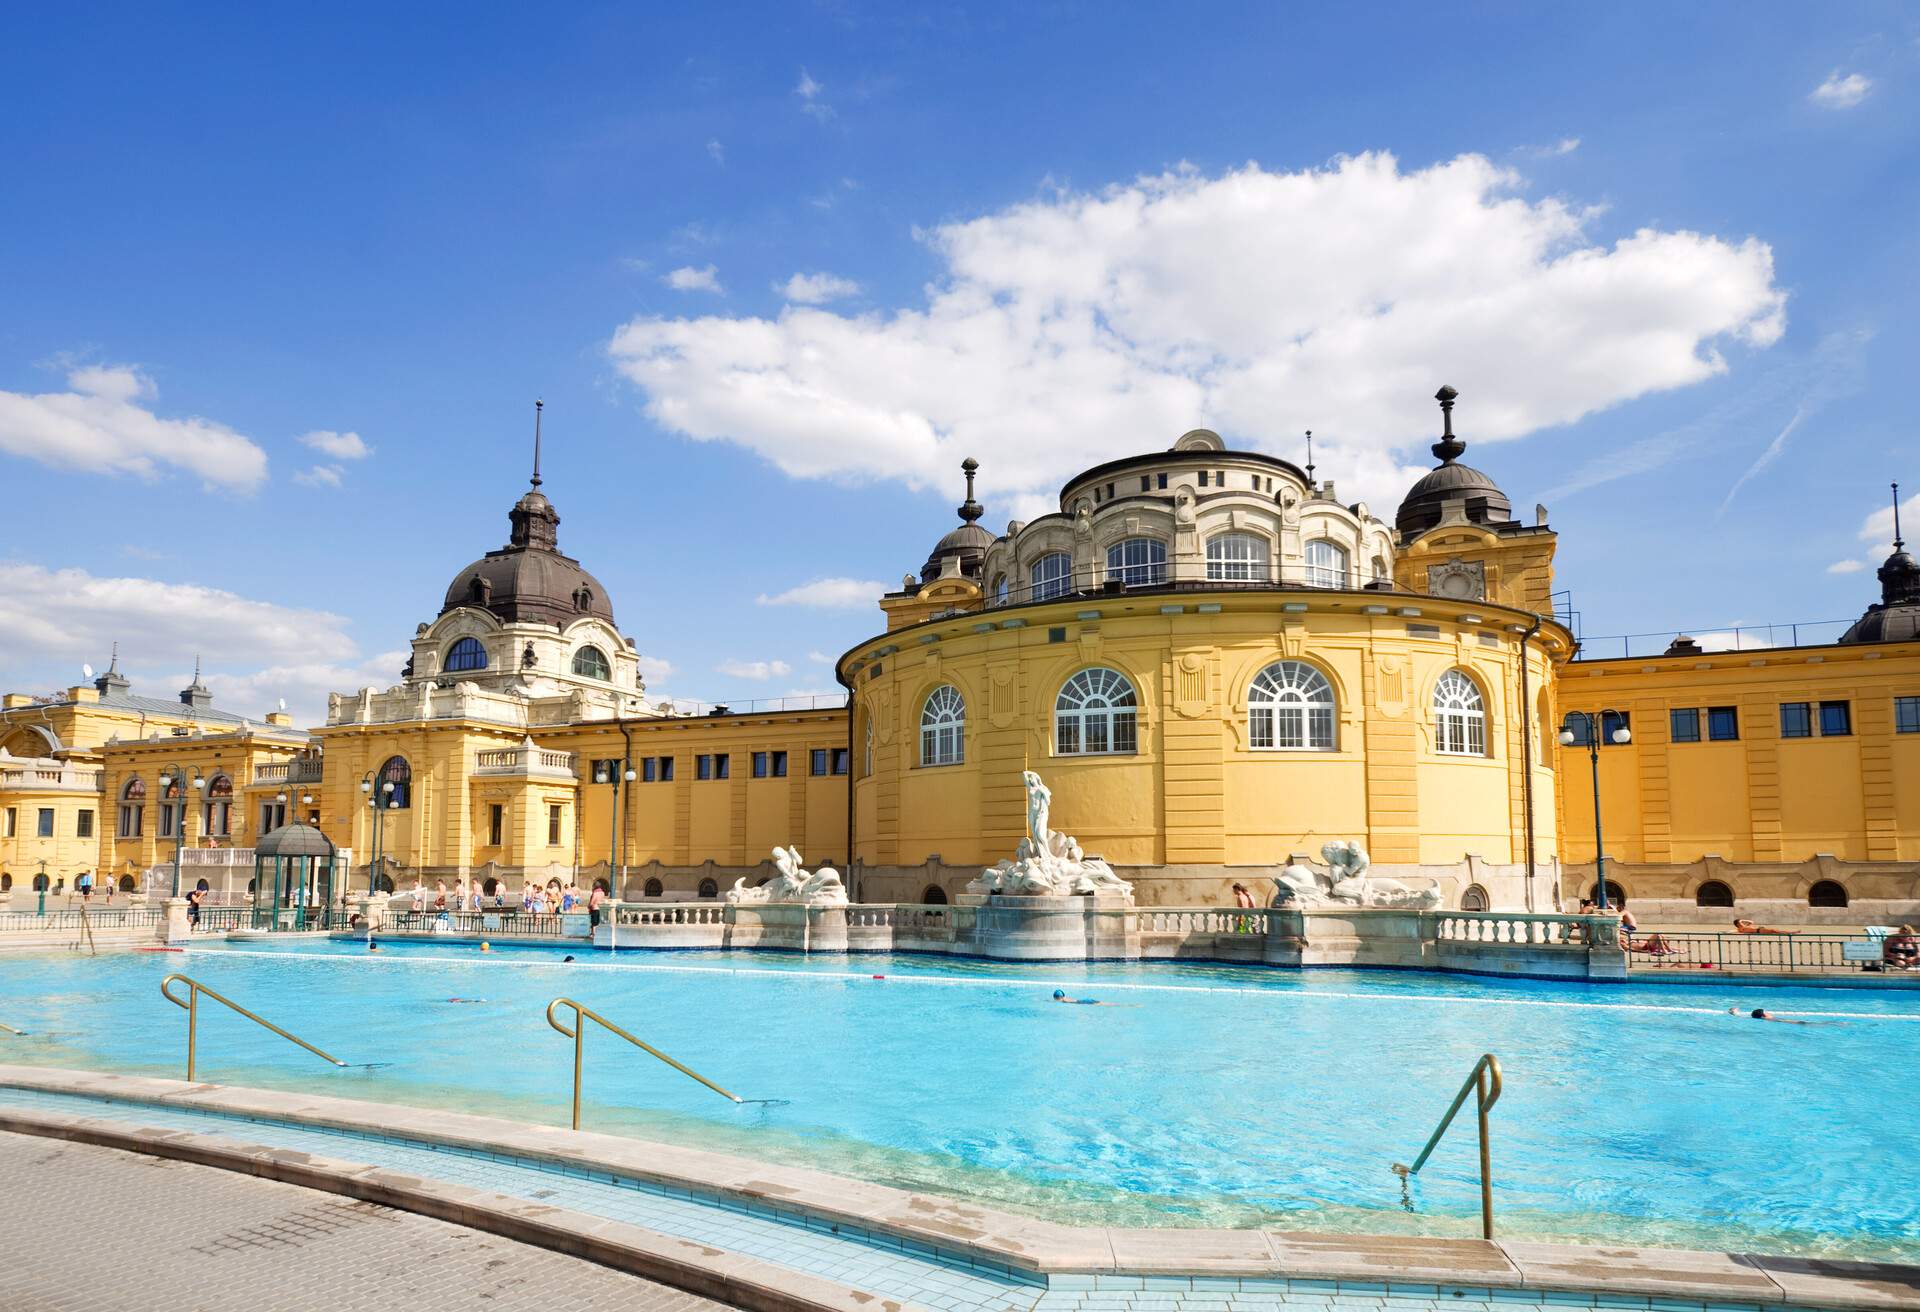 budapest szechnyi bath spa in summer with people